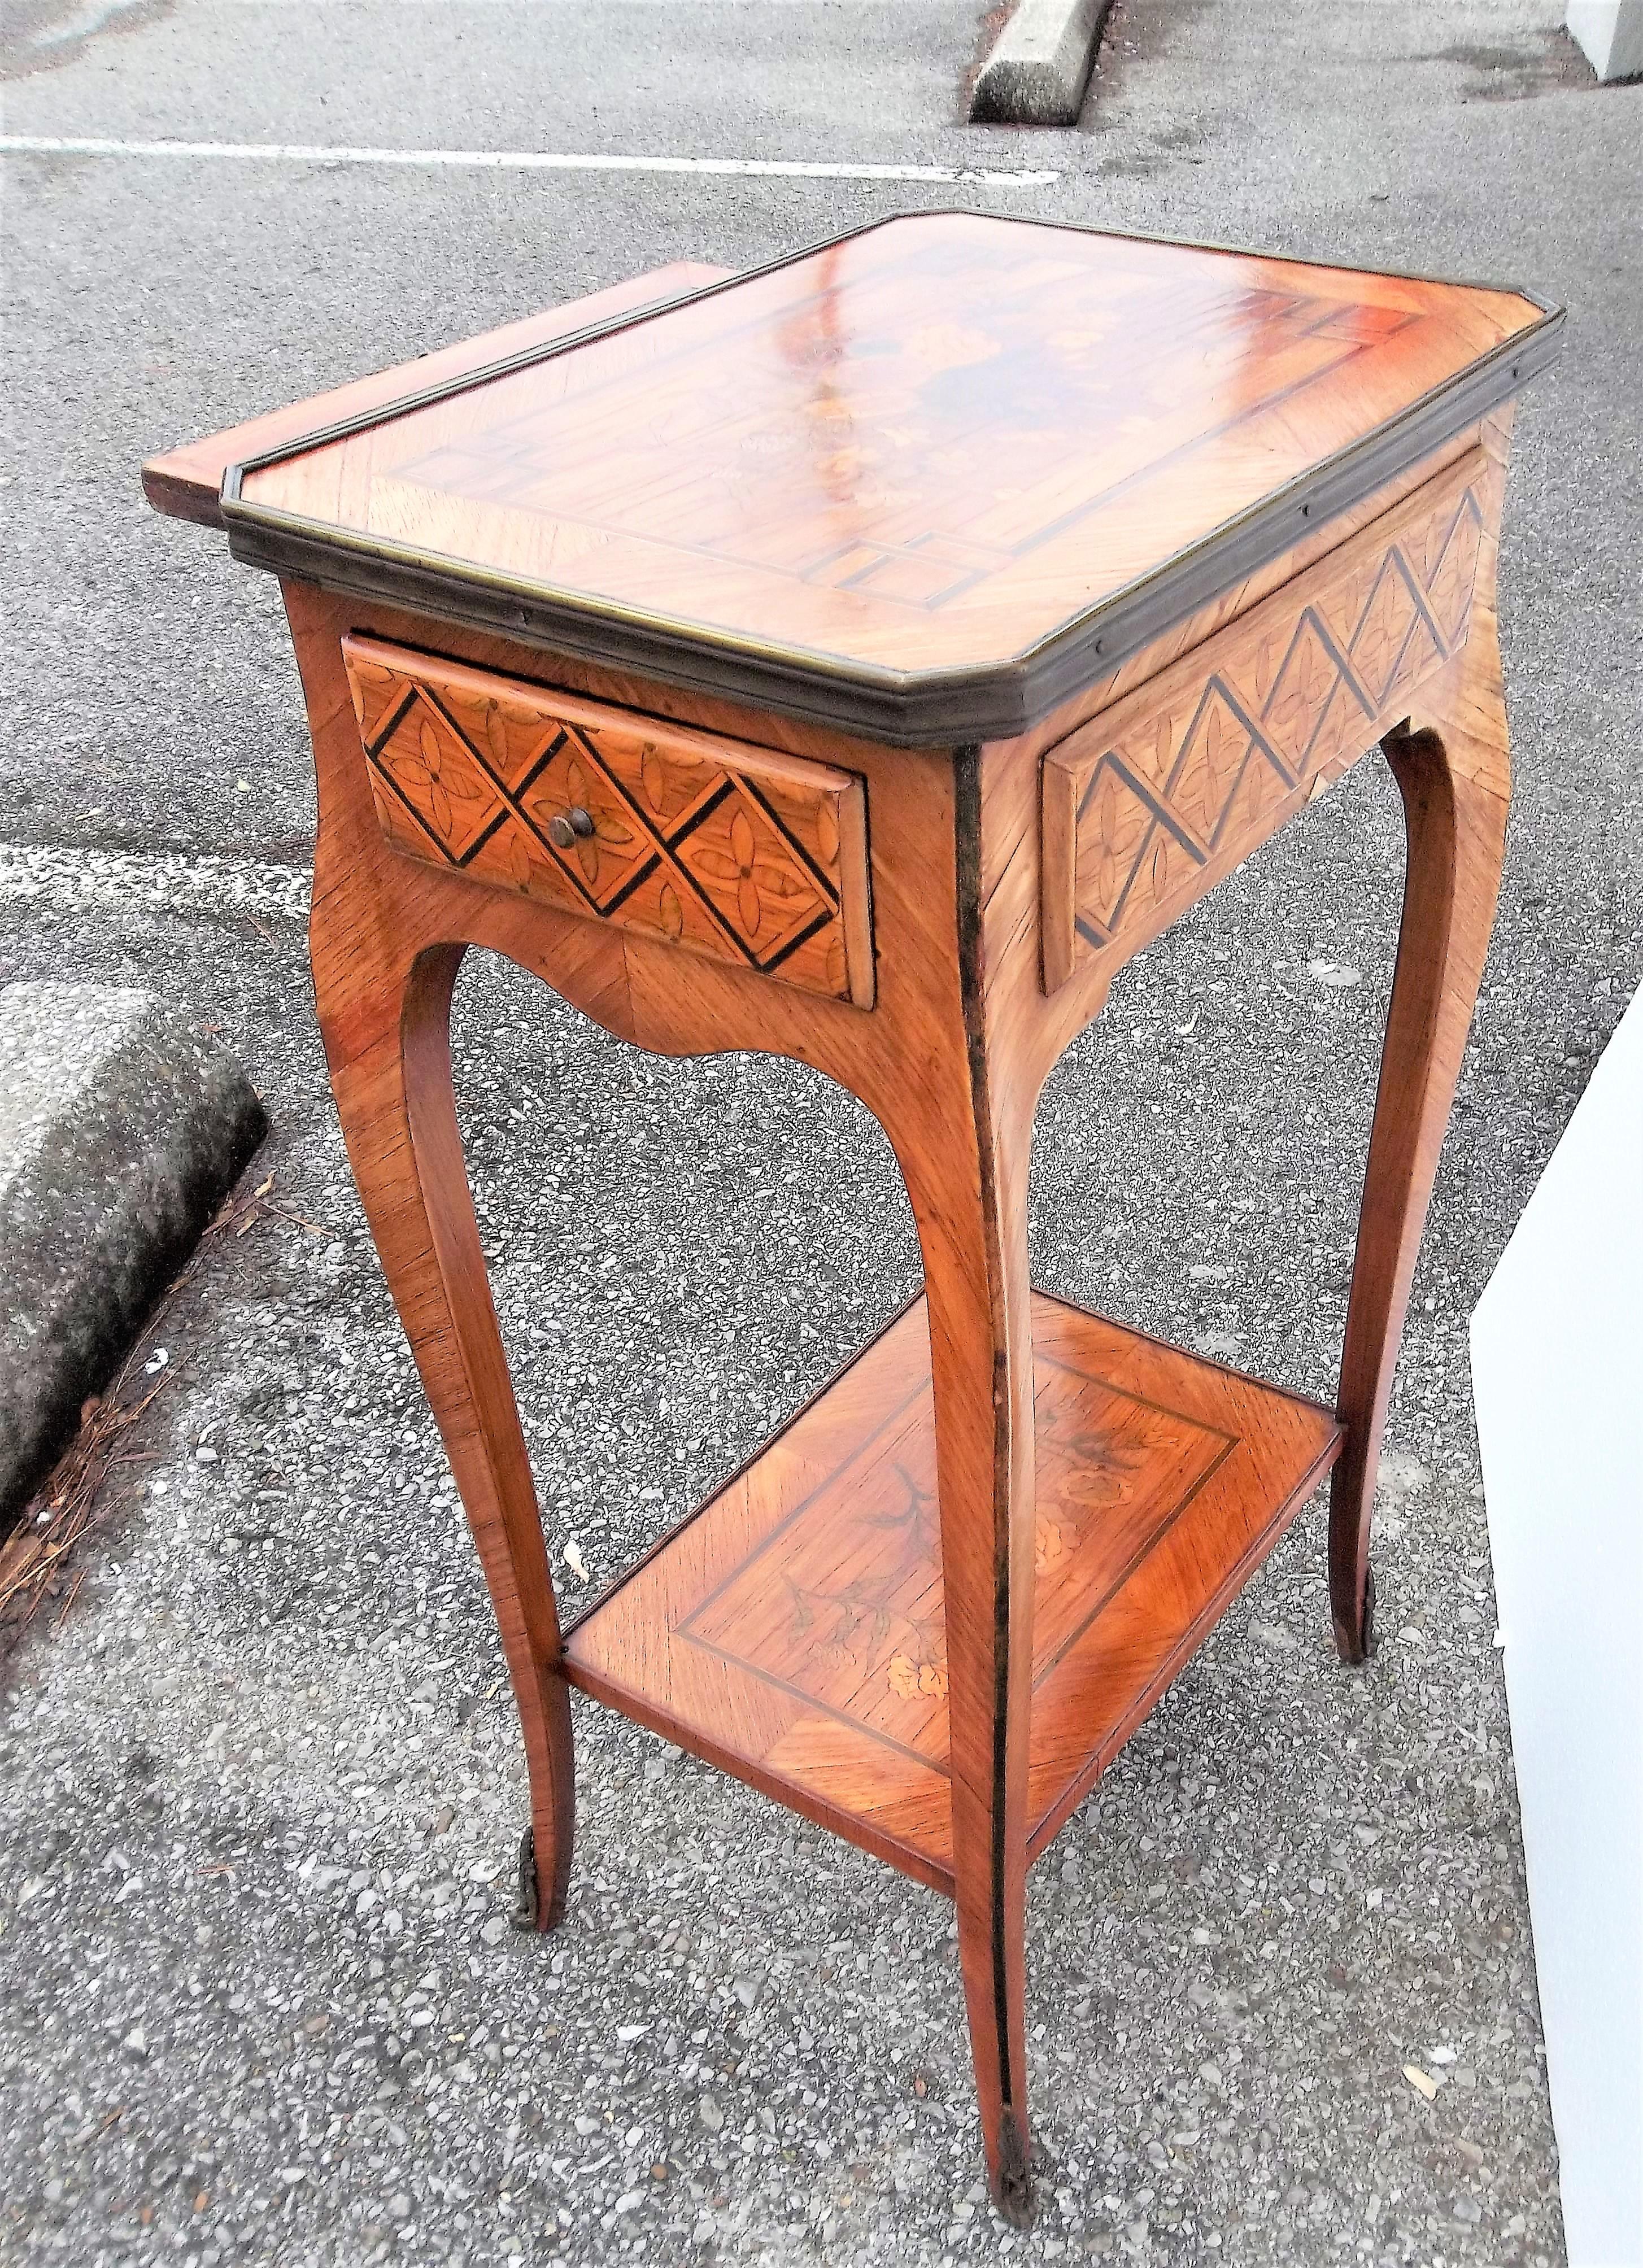 19th Century Louis XV Transitional to Louis XVI Style Marquetry Table